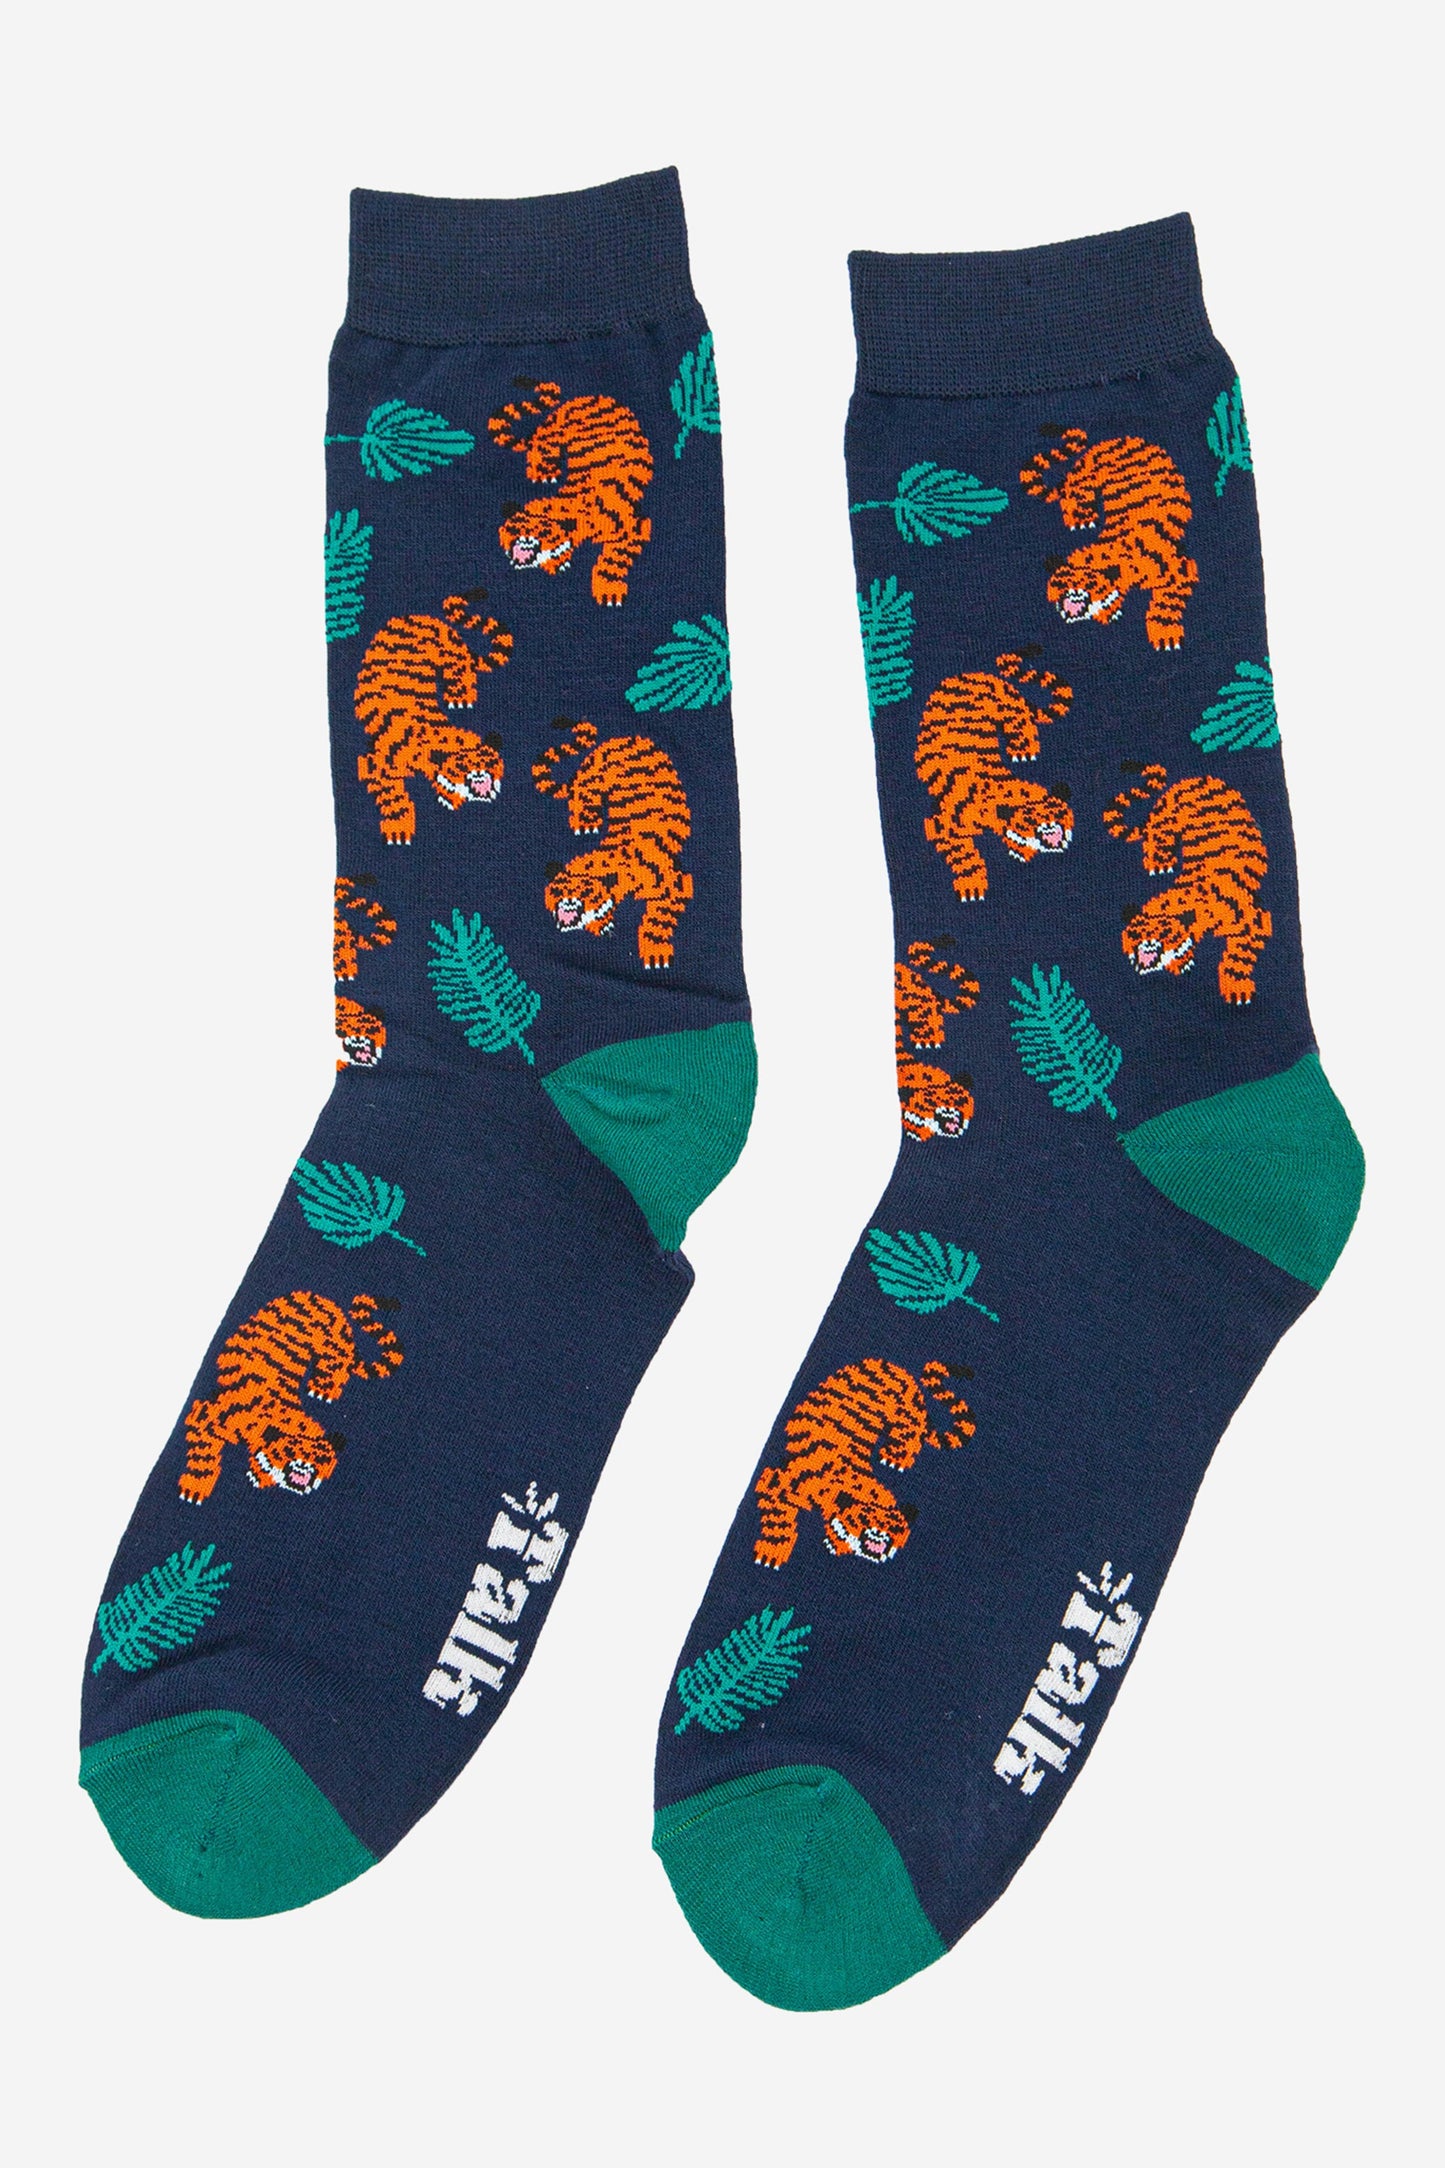 navy blue and green bamboo socks with an all over tiger big cat pattern and jungle leaves